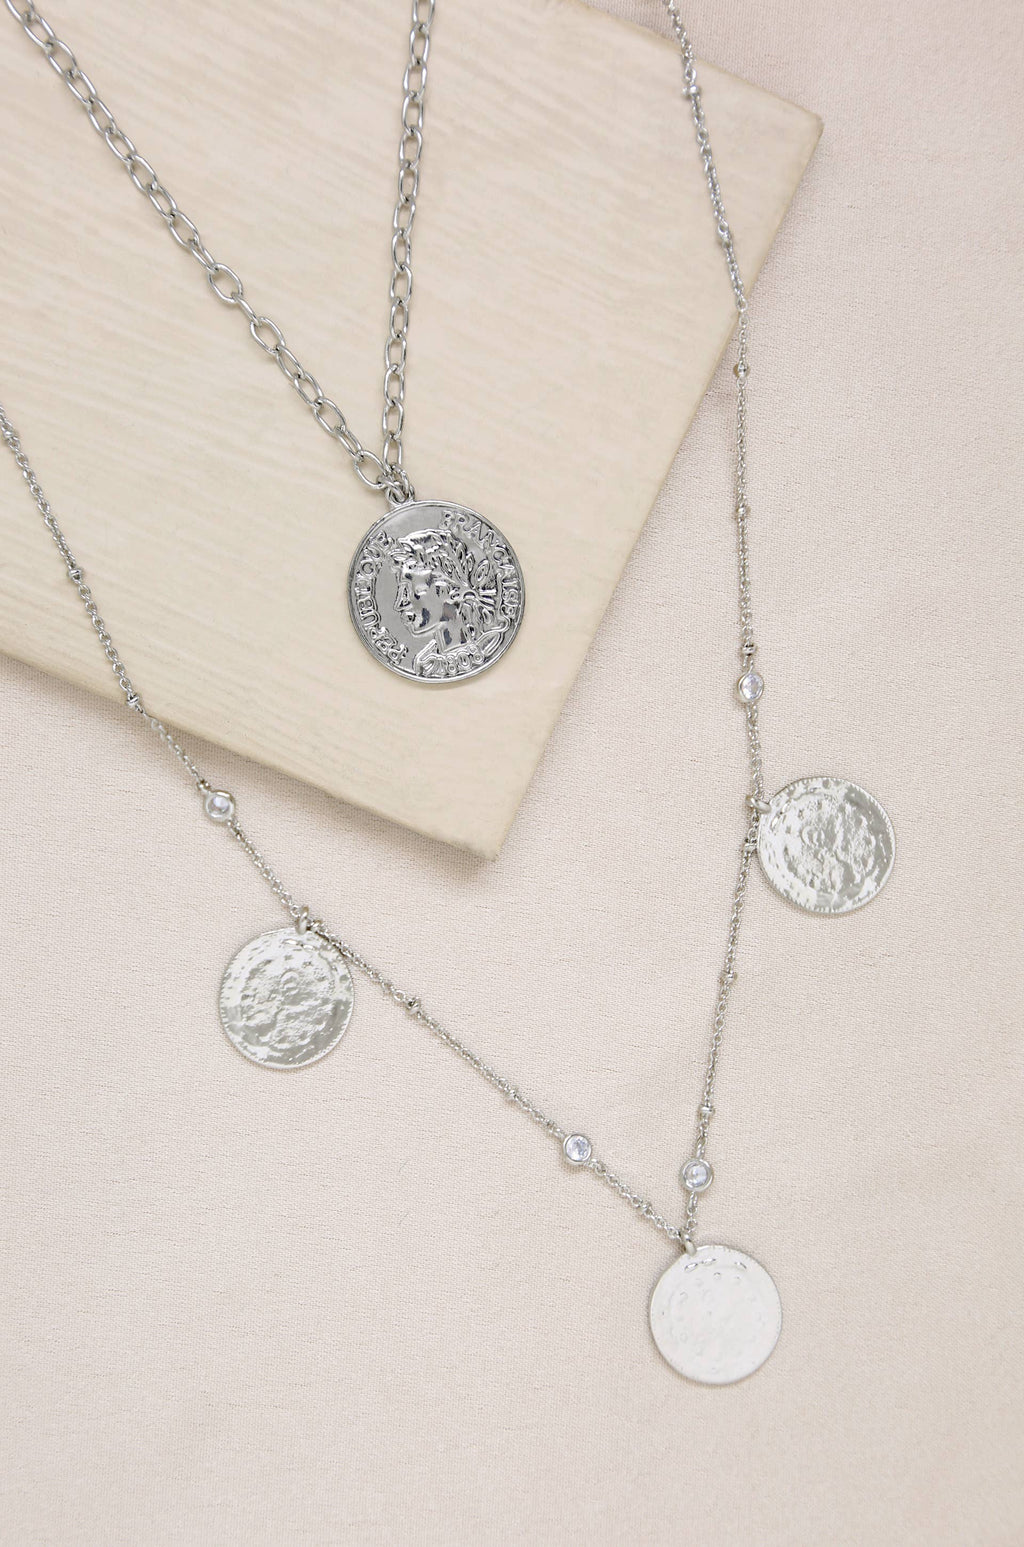 Elite Coin and Crystal Layered Necklace Set in Rhodium